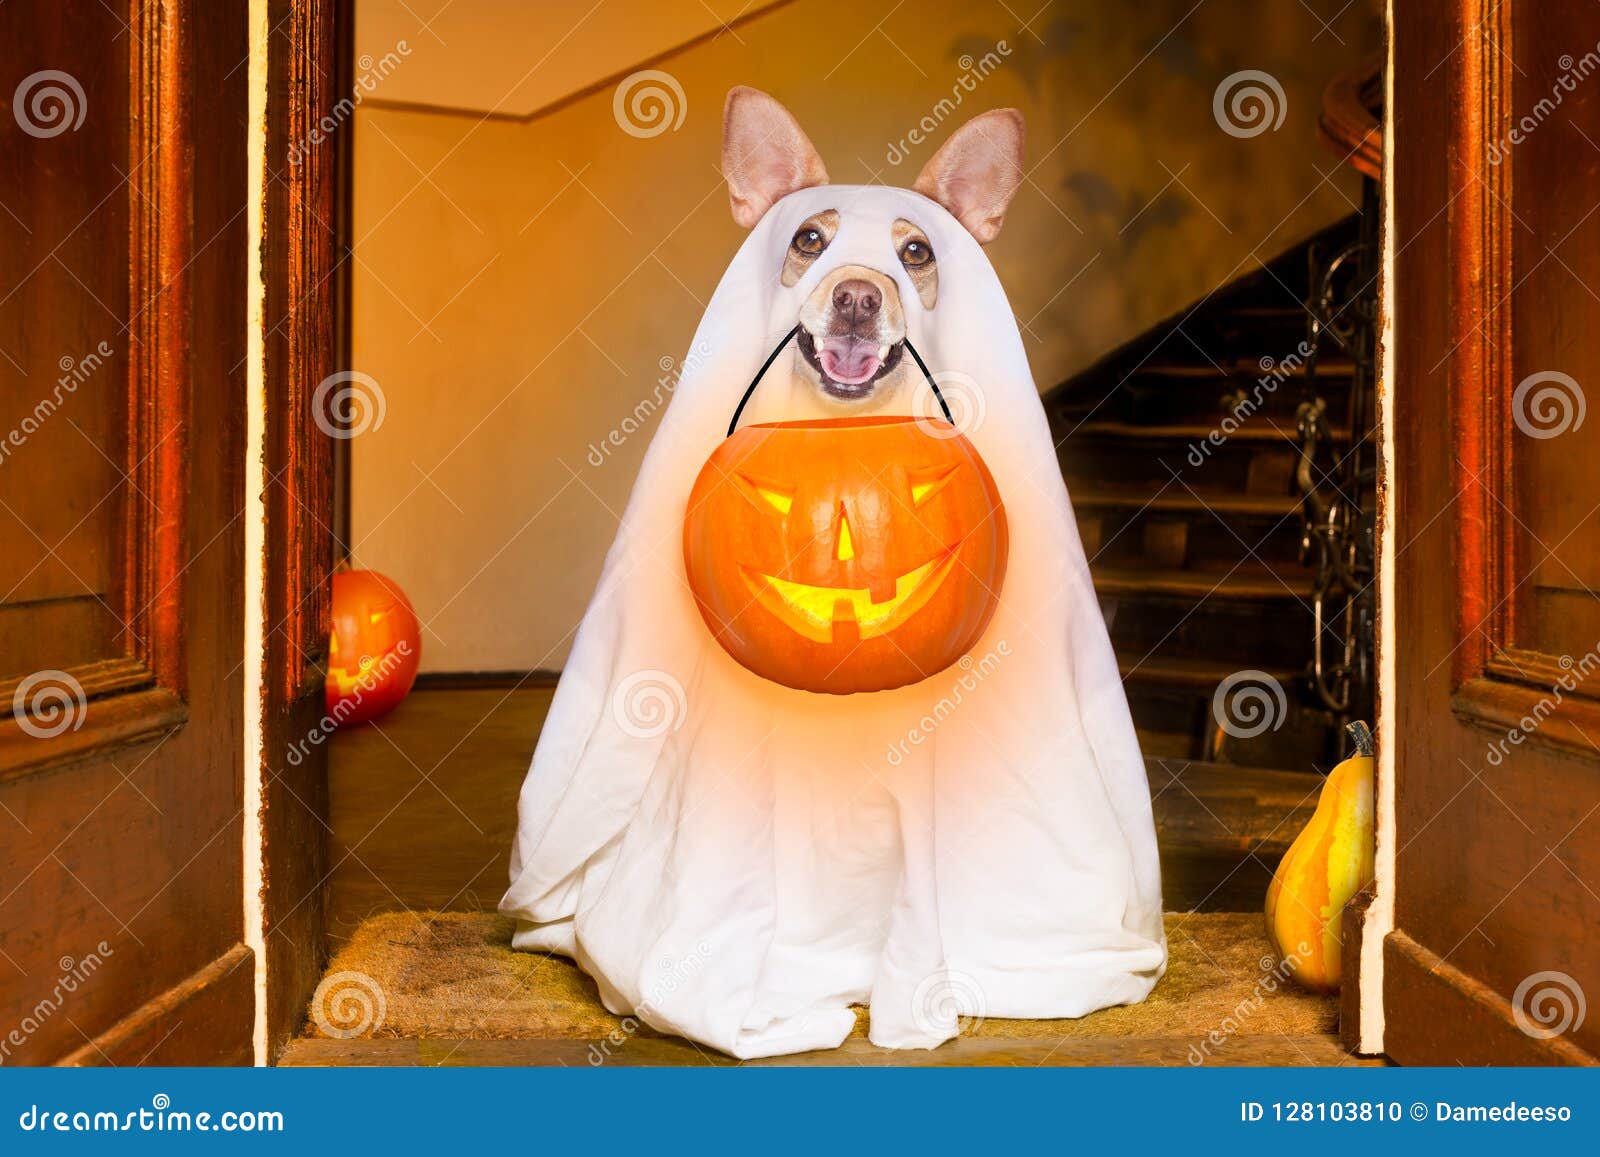 halloween ghost dog trick or treat